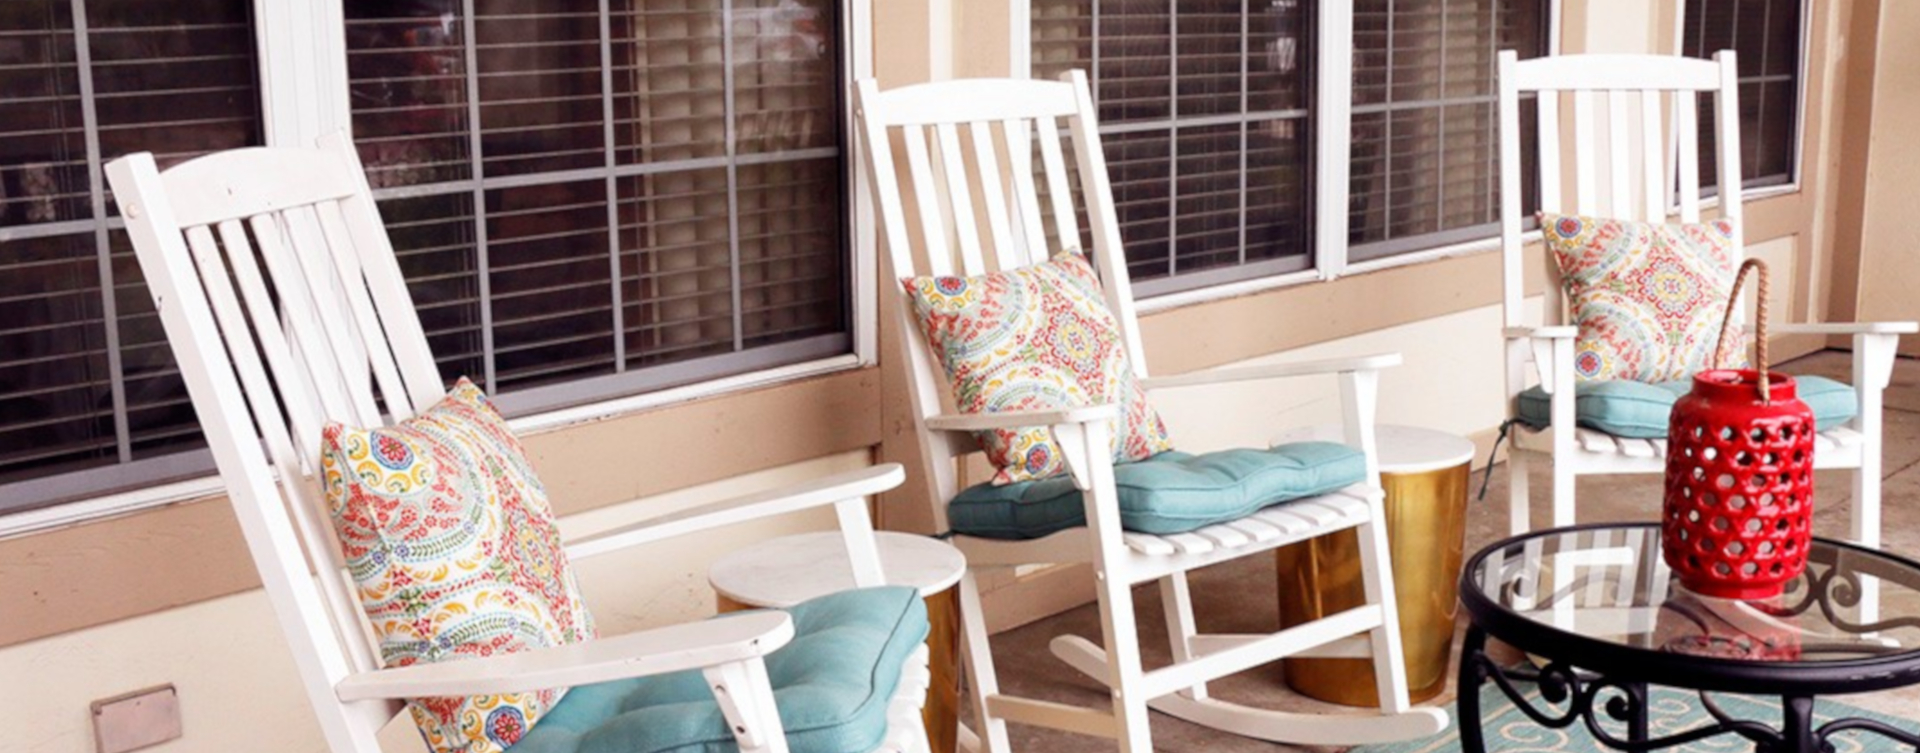 Relax in your favorite chair on the porch at Bickford of West Des Moines